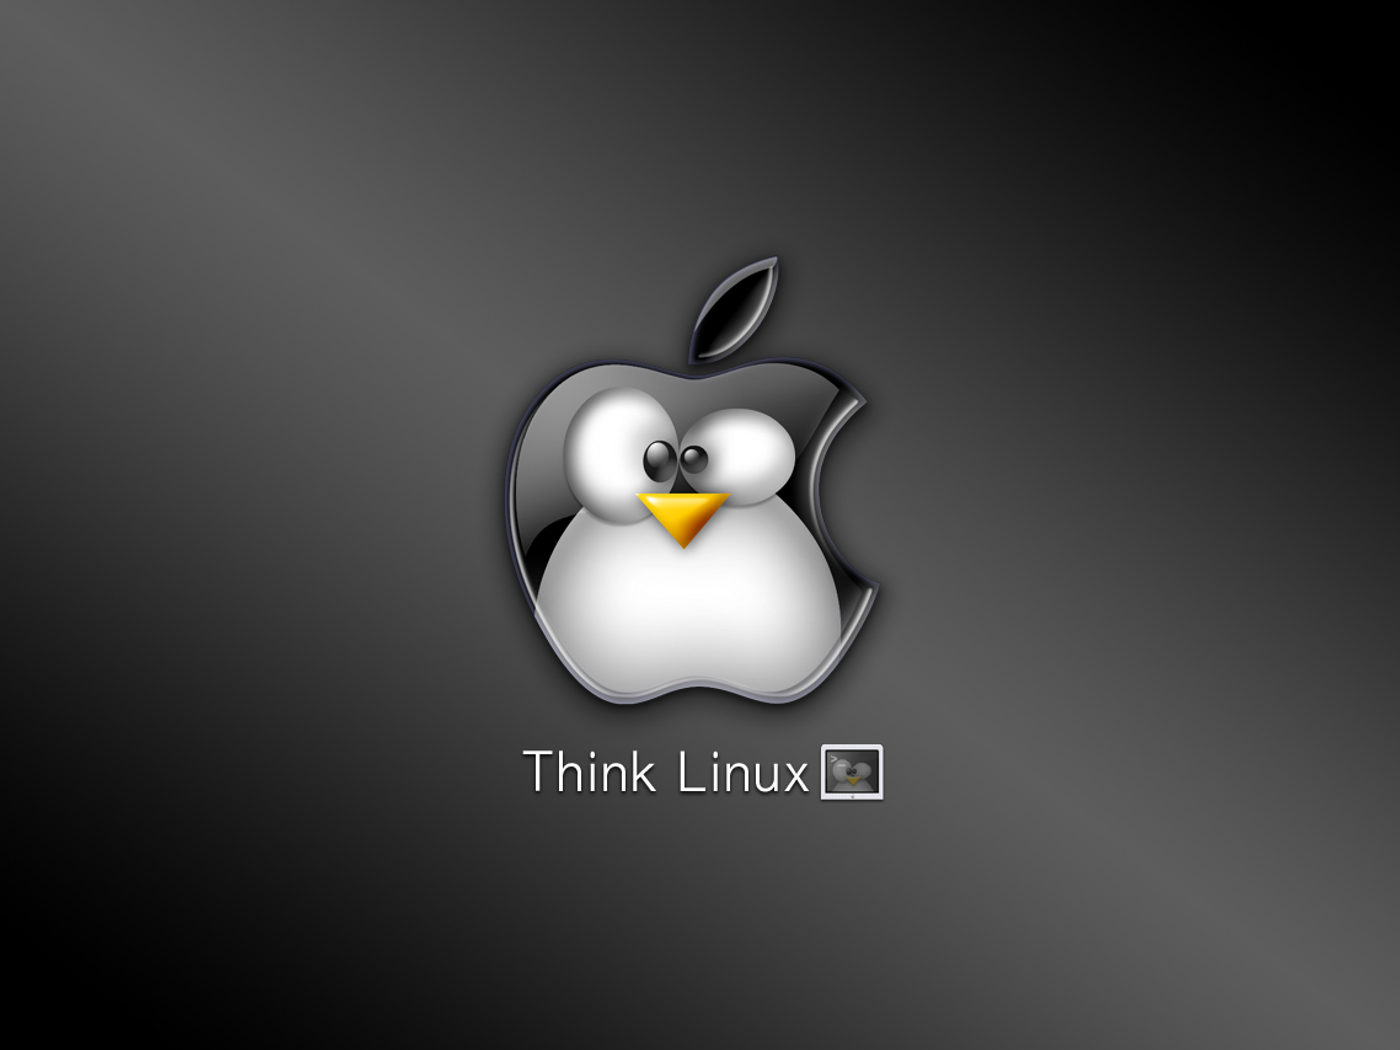 [ThinkLinux_1400x1050.png]